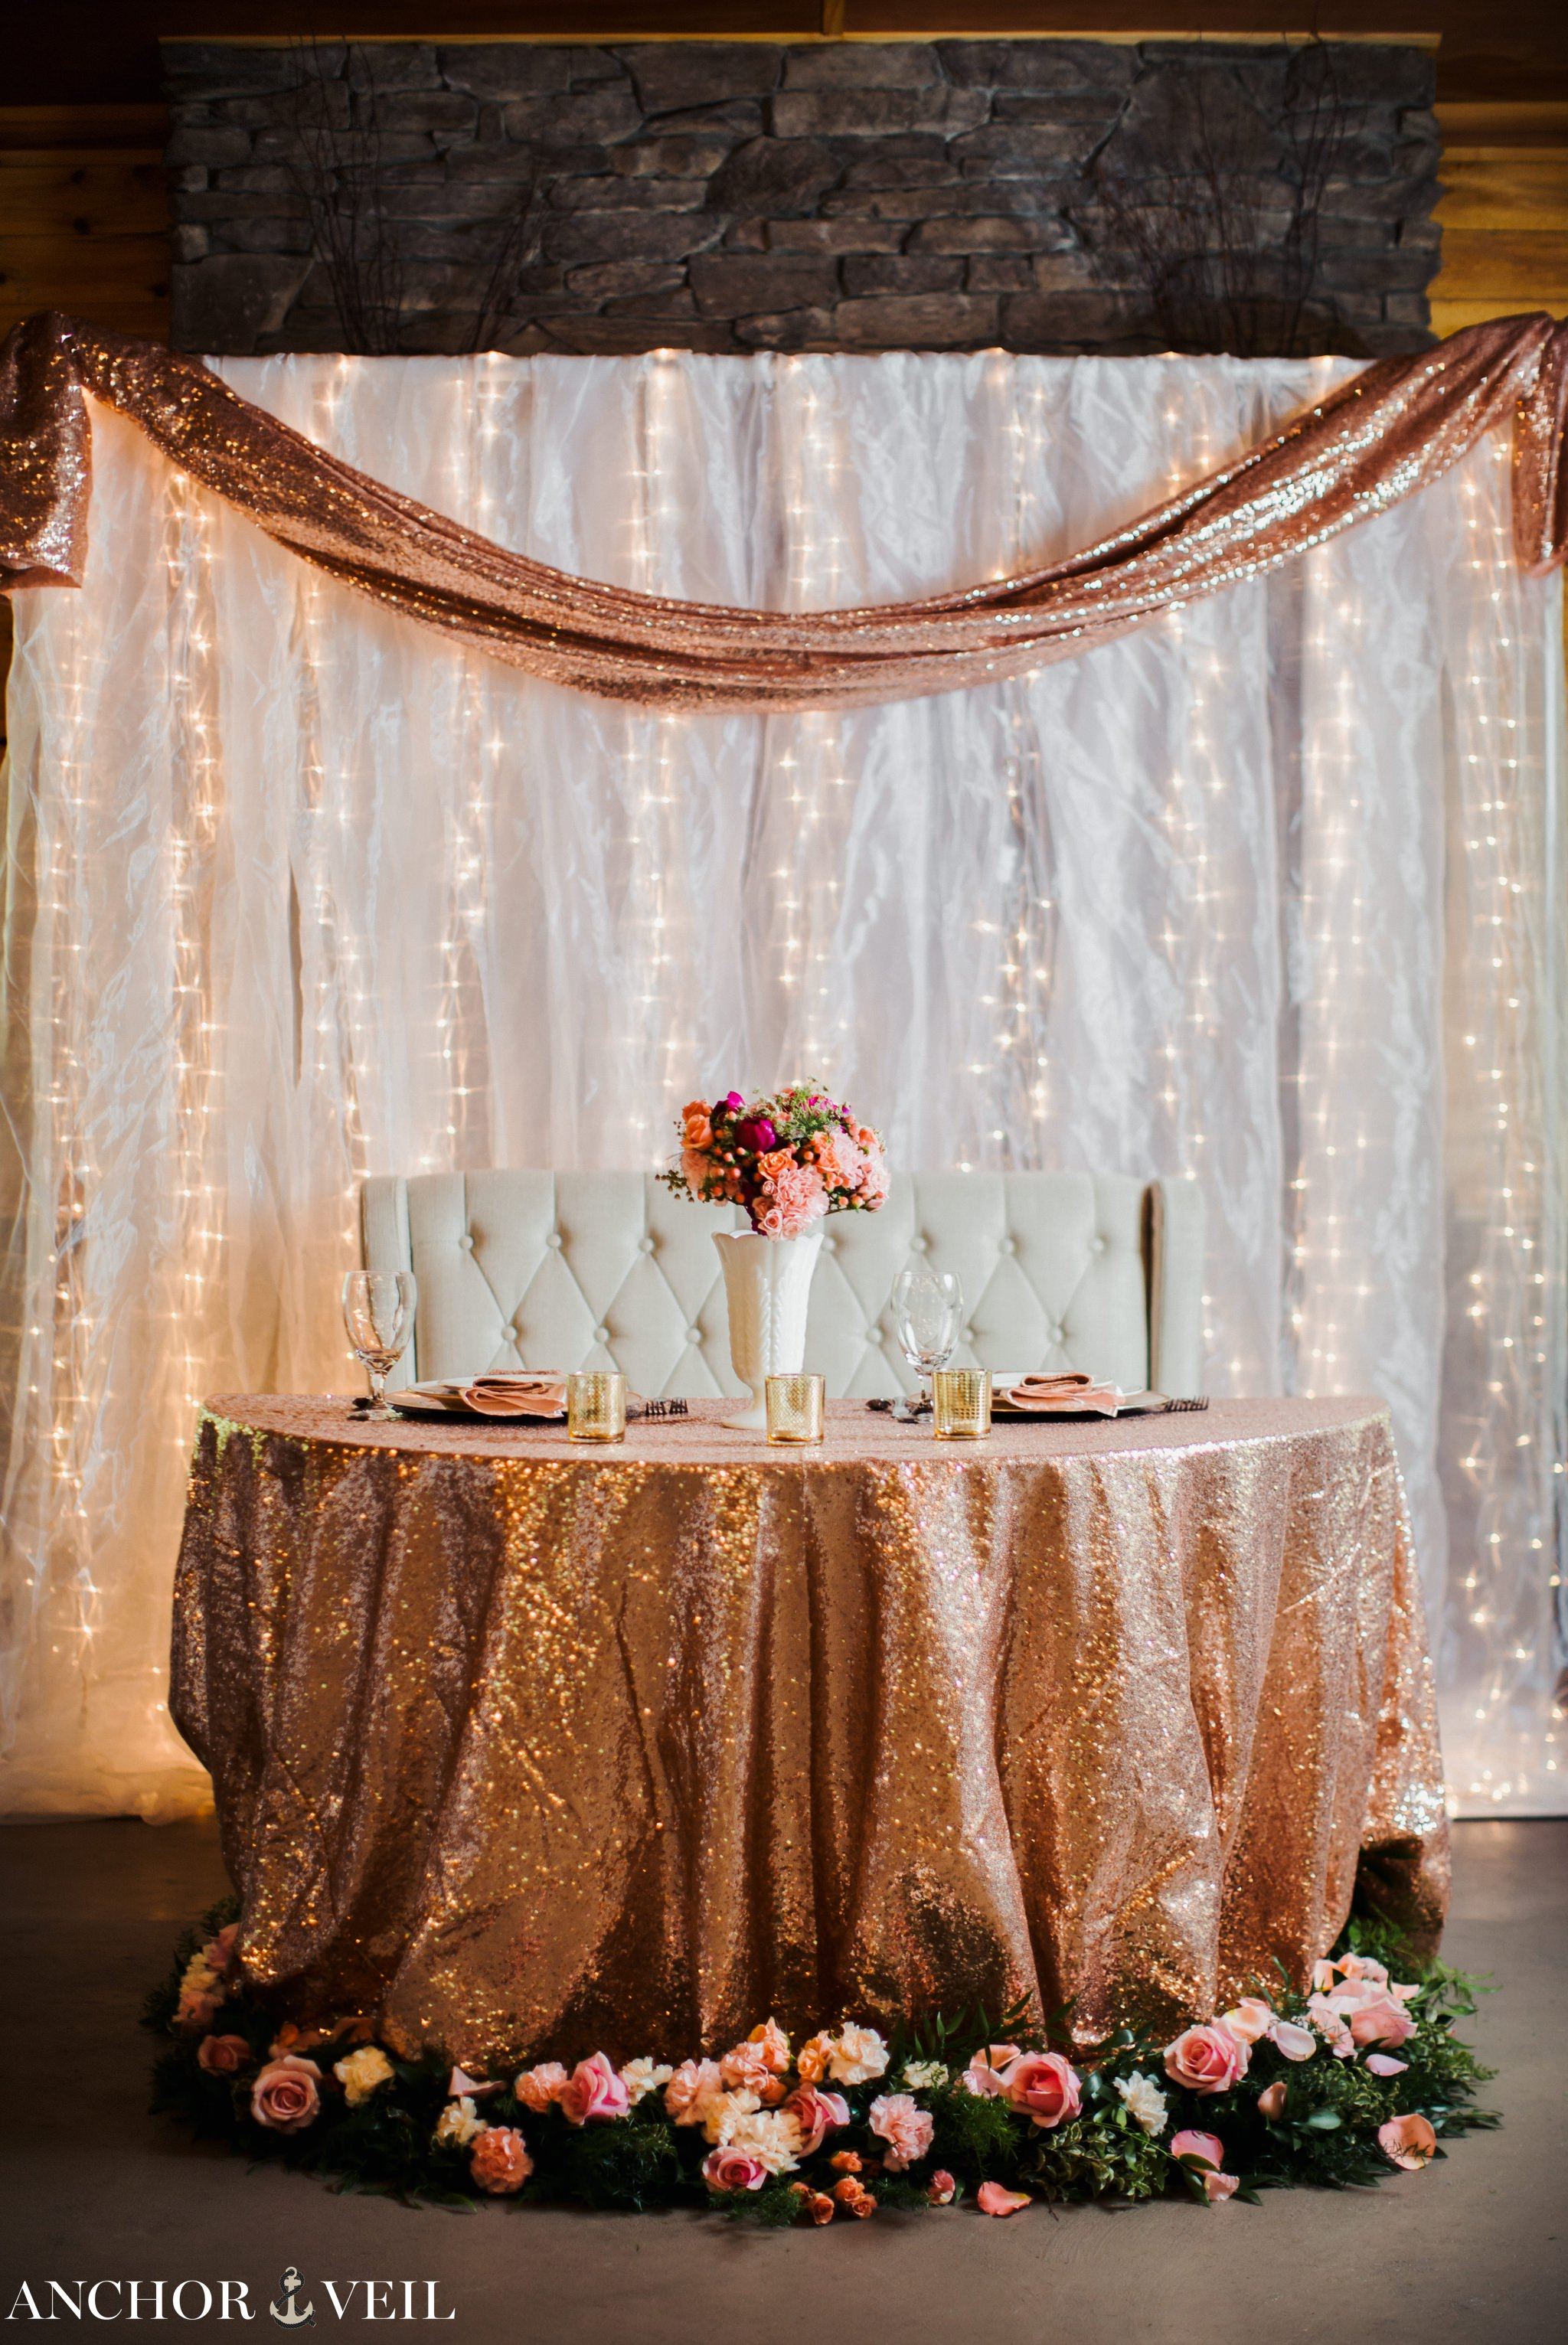 the beautiful tables and florals